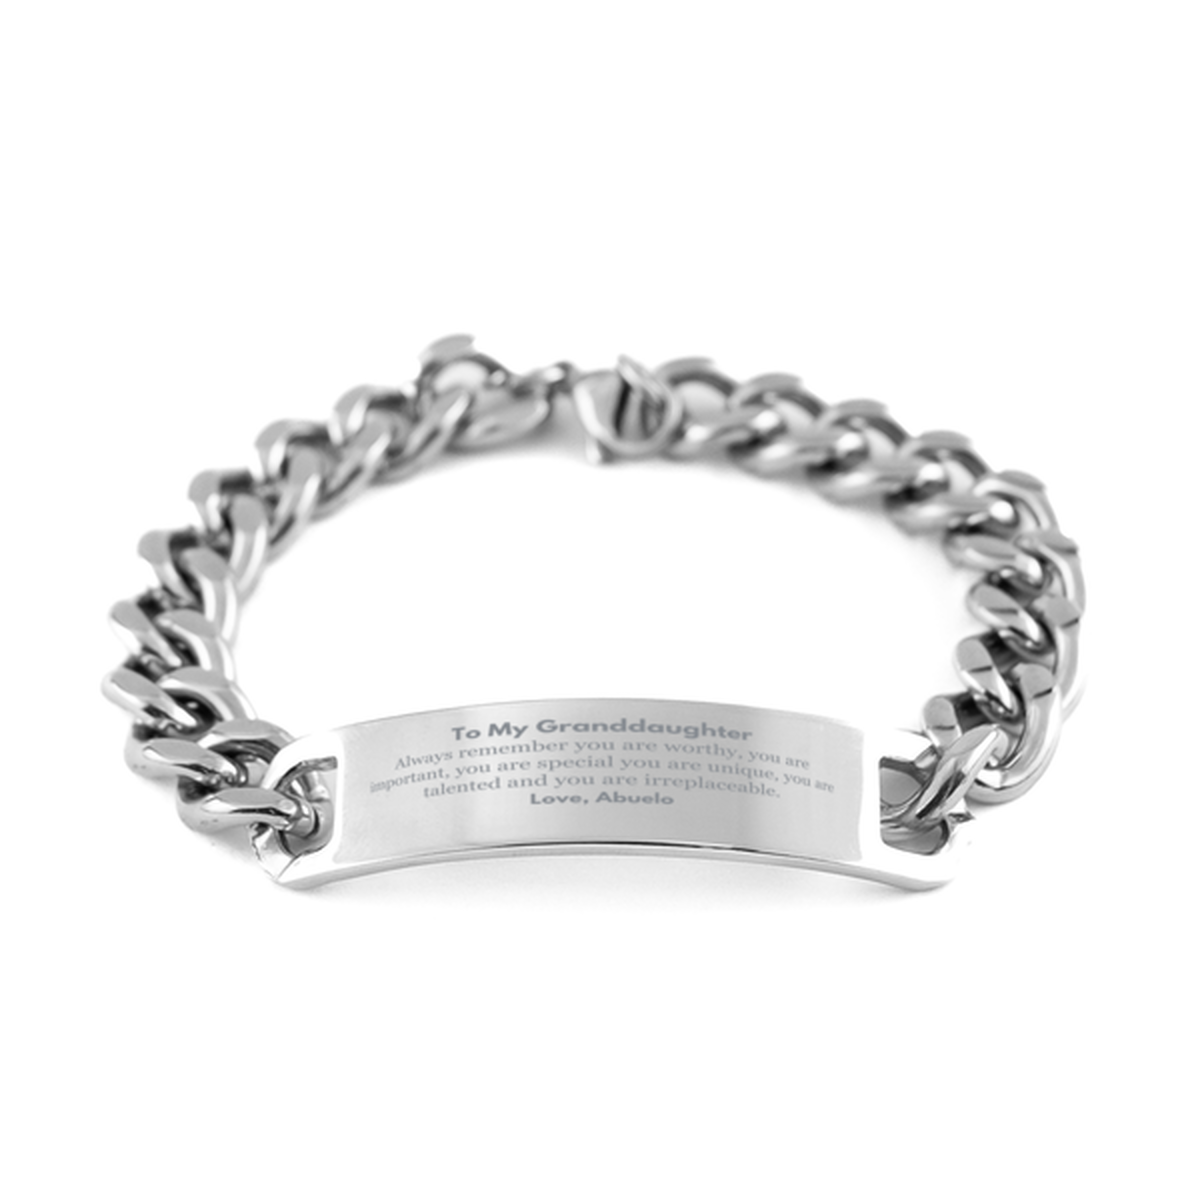 Granddaughter Birthday Gifts from Abuelo, Inspirational Cuban Chain Stainless Steel Bracelet for Granddaughter Christmas Graduation Gifts for Granddaughter Always remember you are worthy, you are important. Love, Abuelo